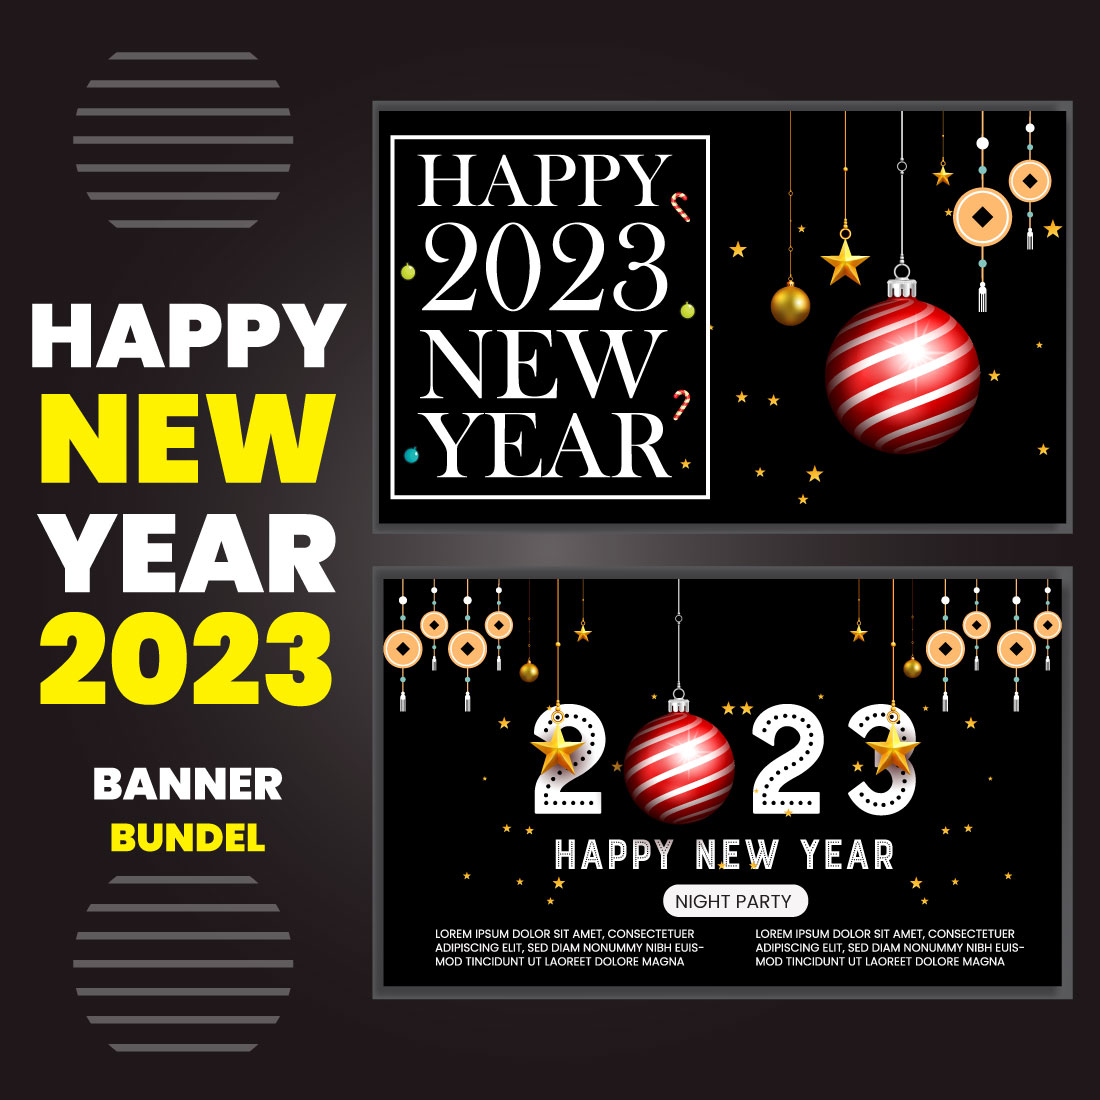 Happy New Year 2023 Banner main cover.